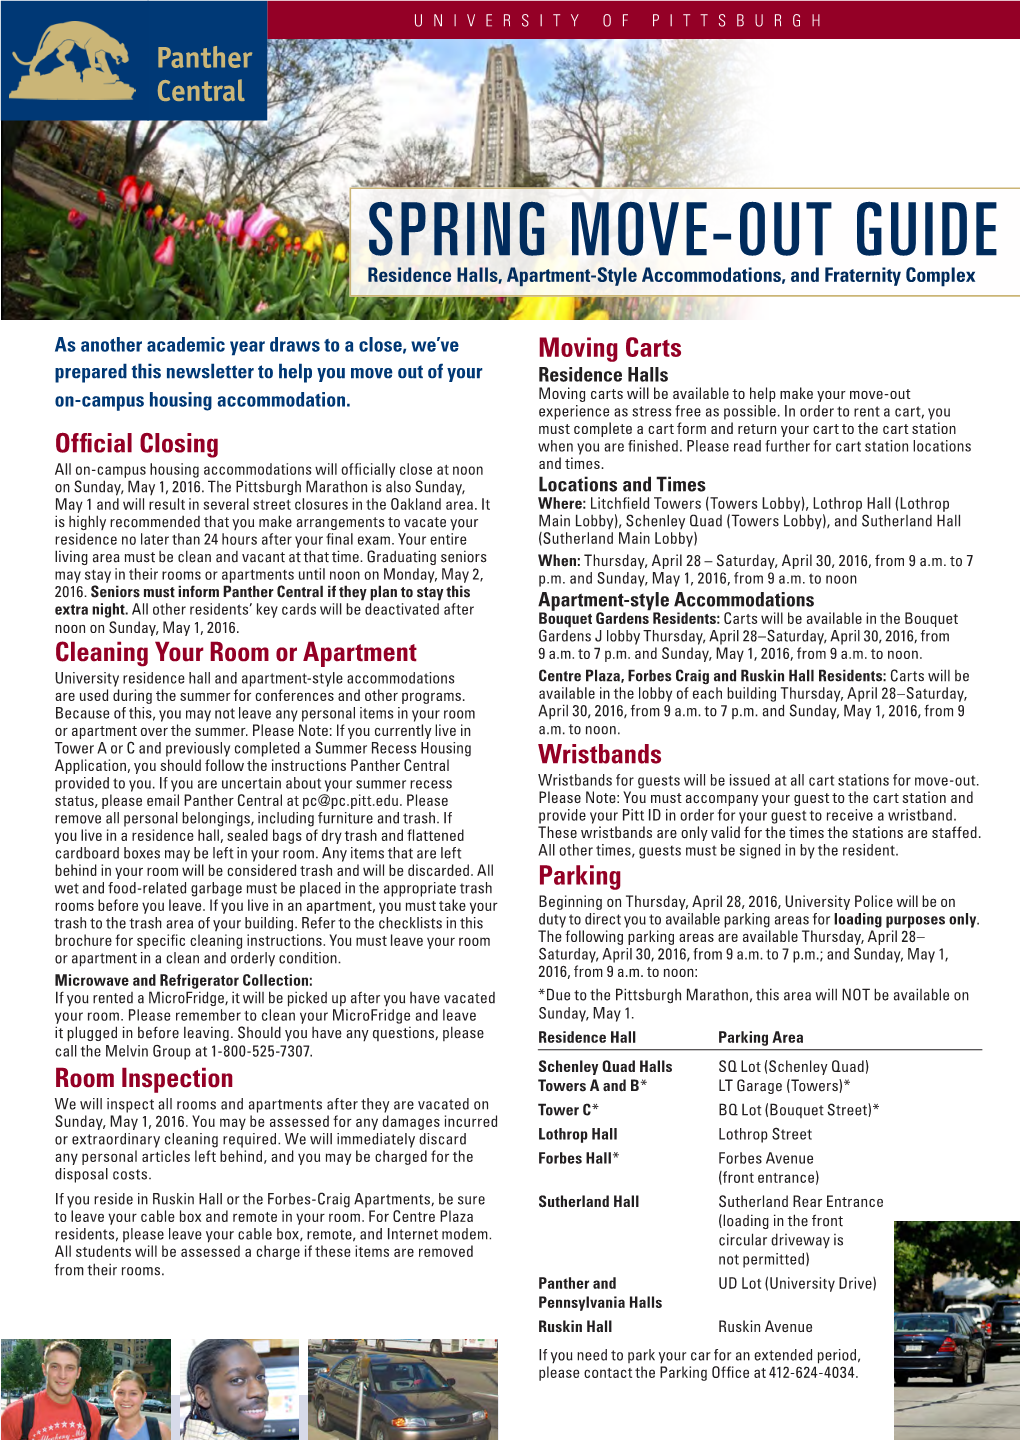 SPRING MOVE-OUT GUIDE Residence Halls, Apartment-Style Accommodations, and Fraternity Complex